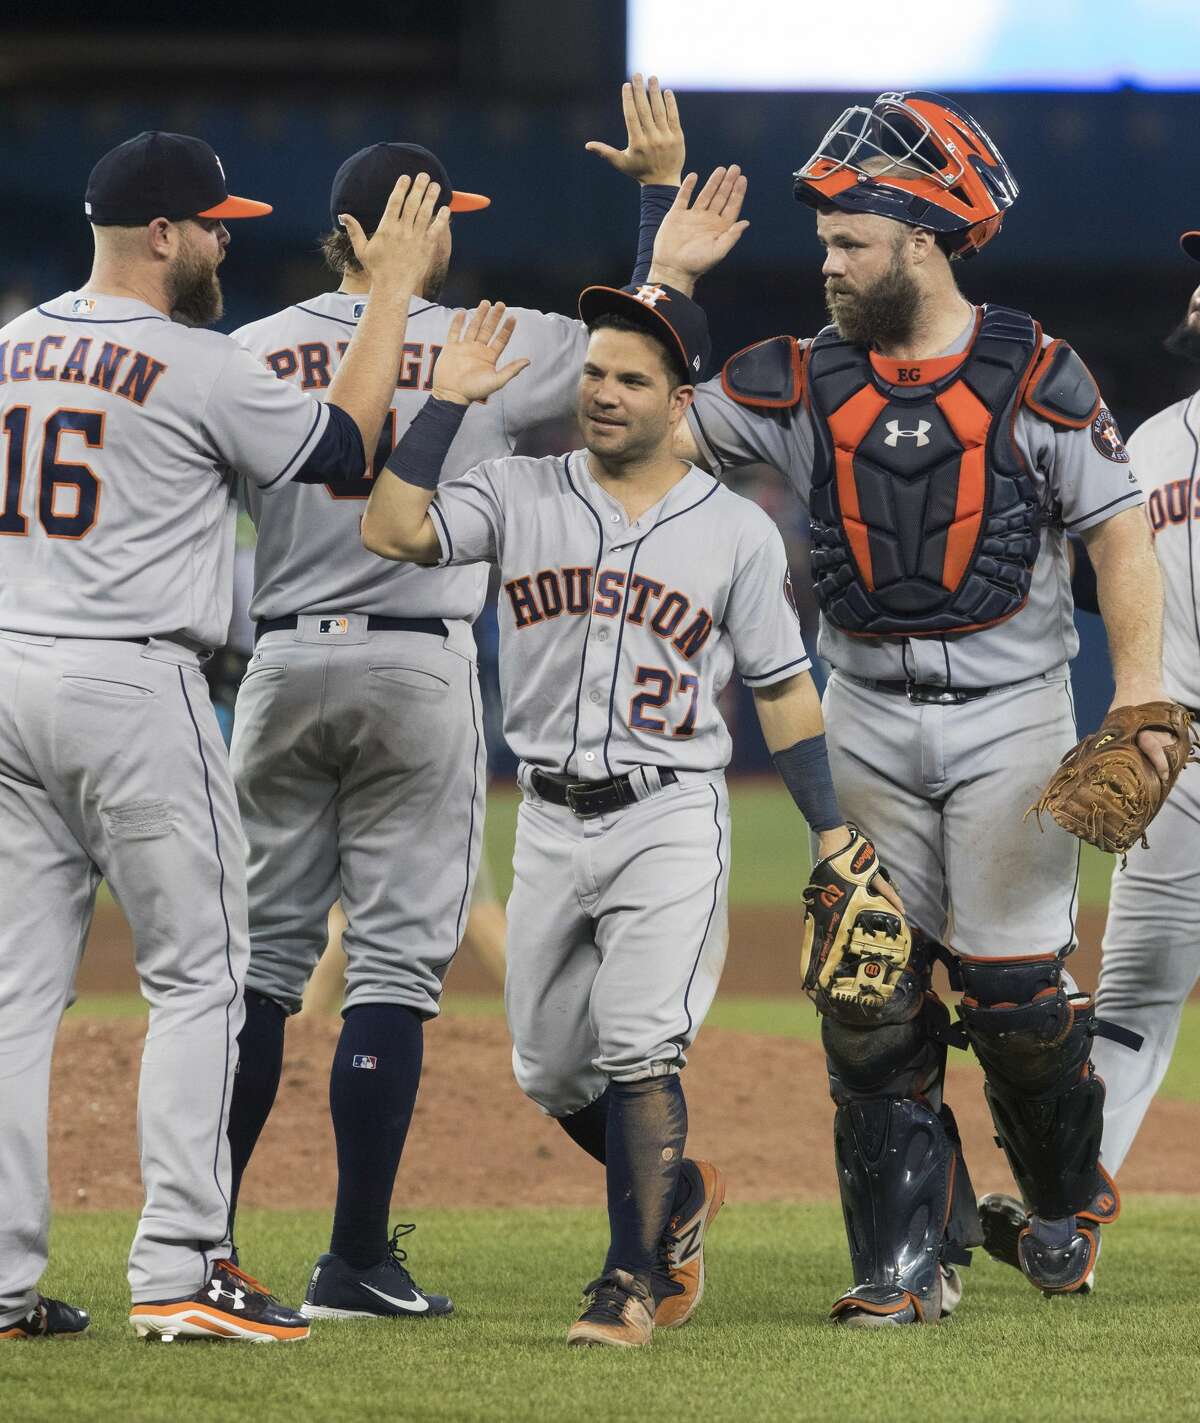 The Houston Astros celebrate after defeating the Toronto Blue Jays 12-2 in a baseball game Friday, July 7, 2017, in Toronto. (Fred Thornhill/The Canadian Press via AP)